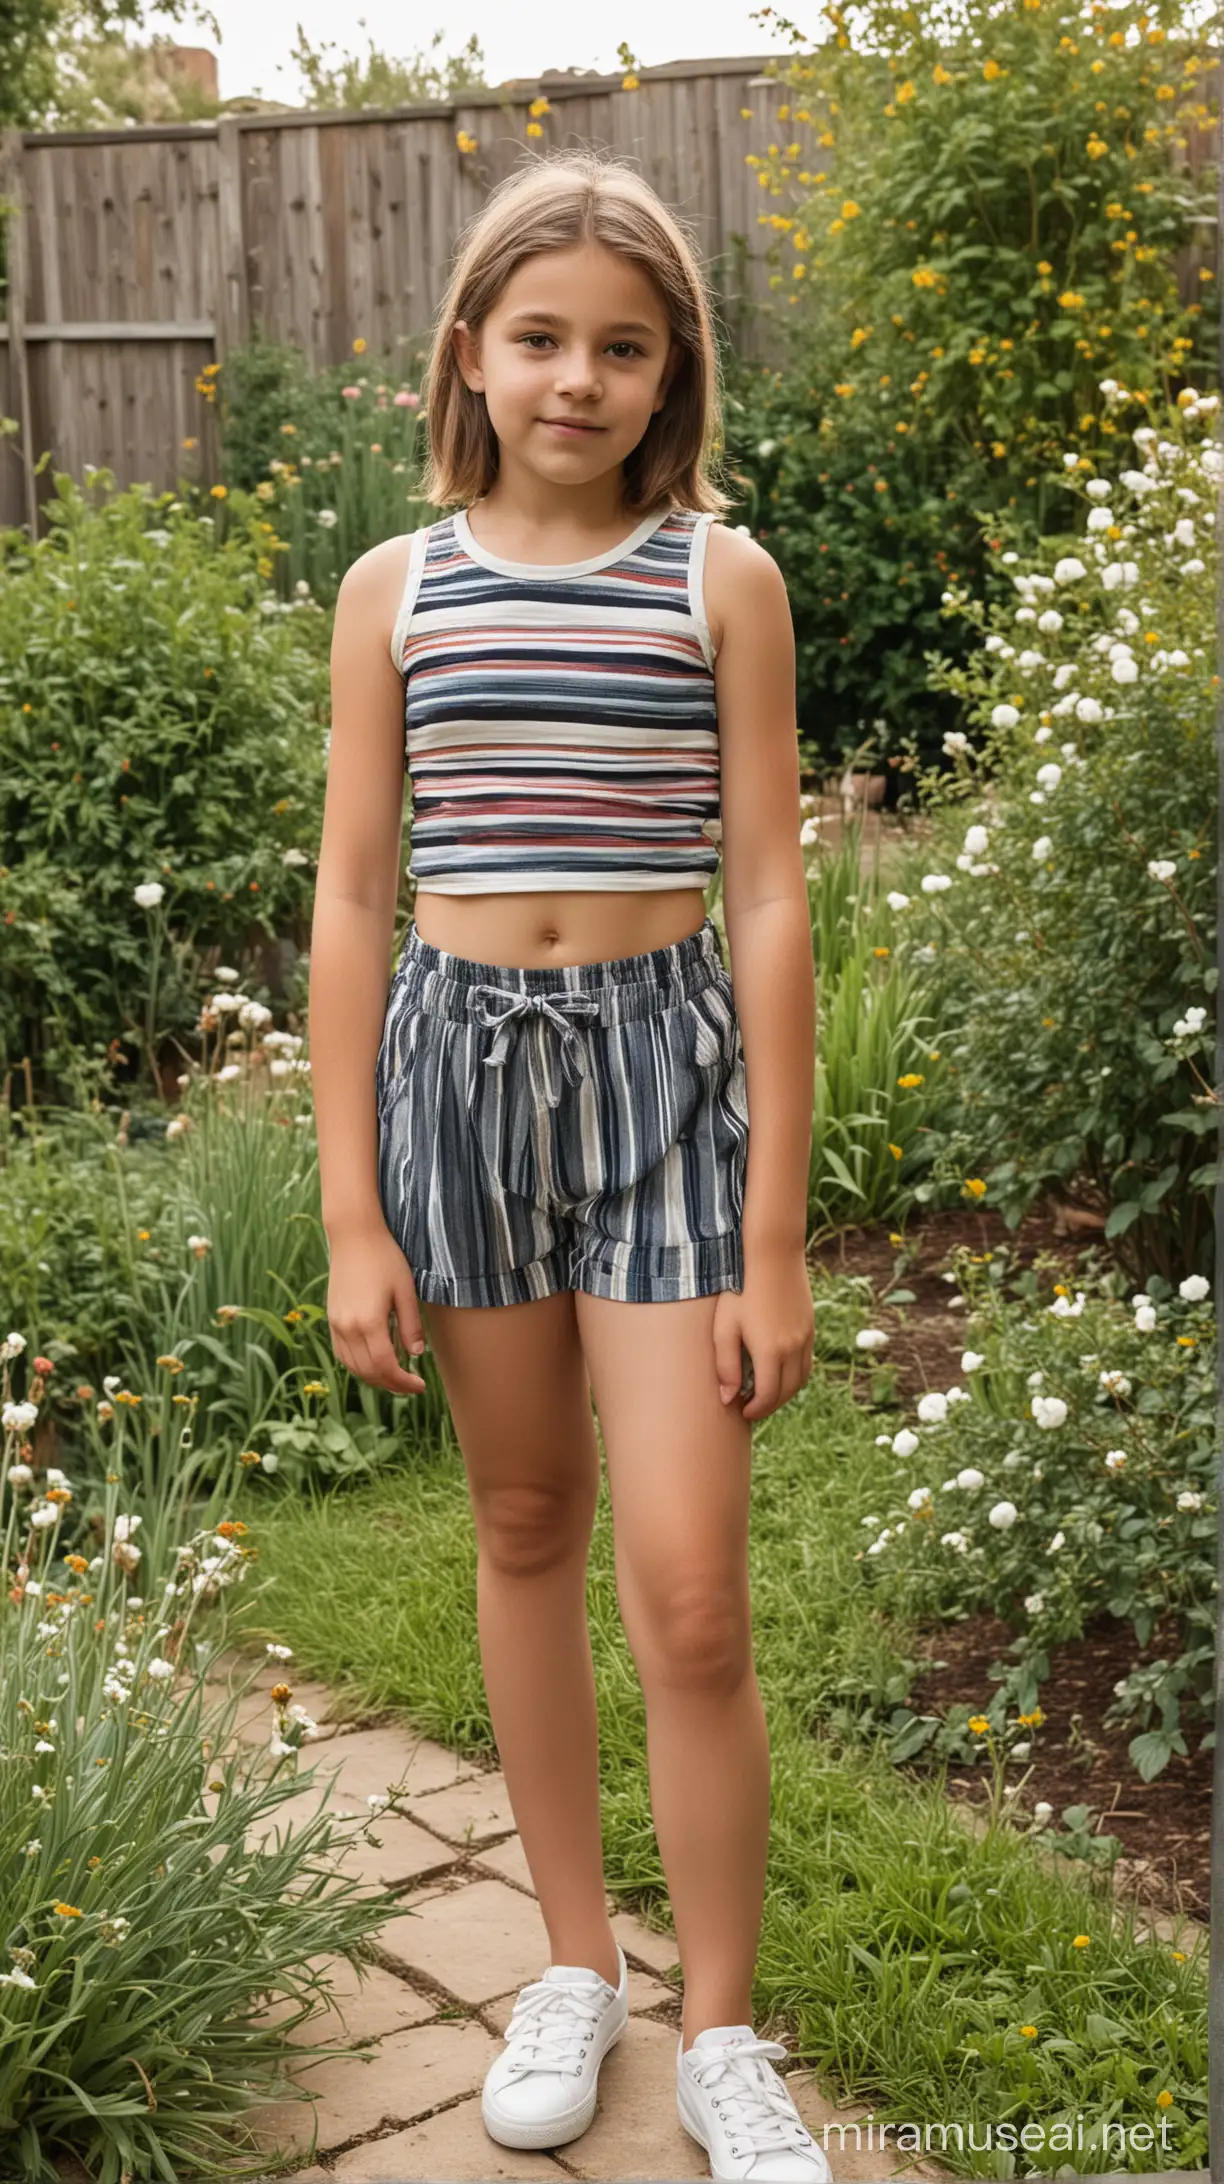 Stylish 12YearOld Girl in Striped Crop Top and Shorts Exploring Garden